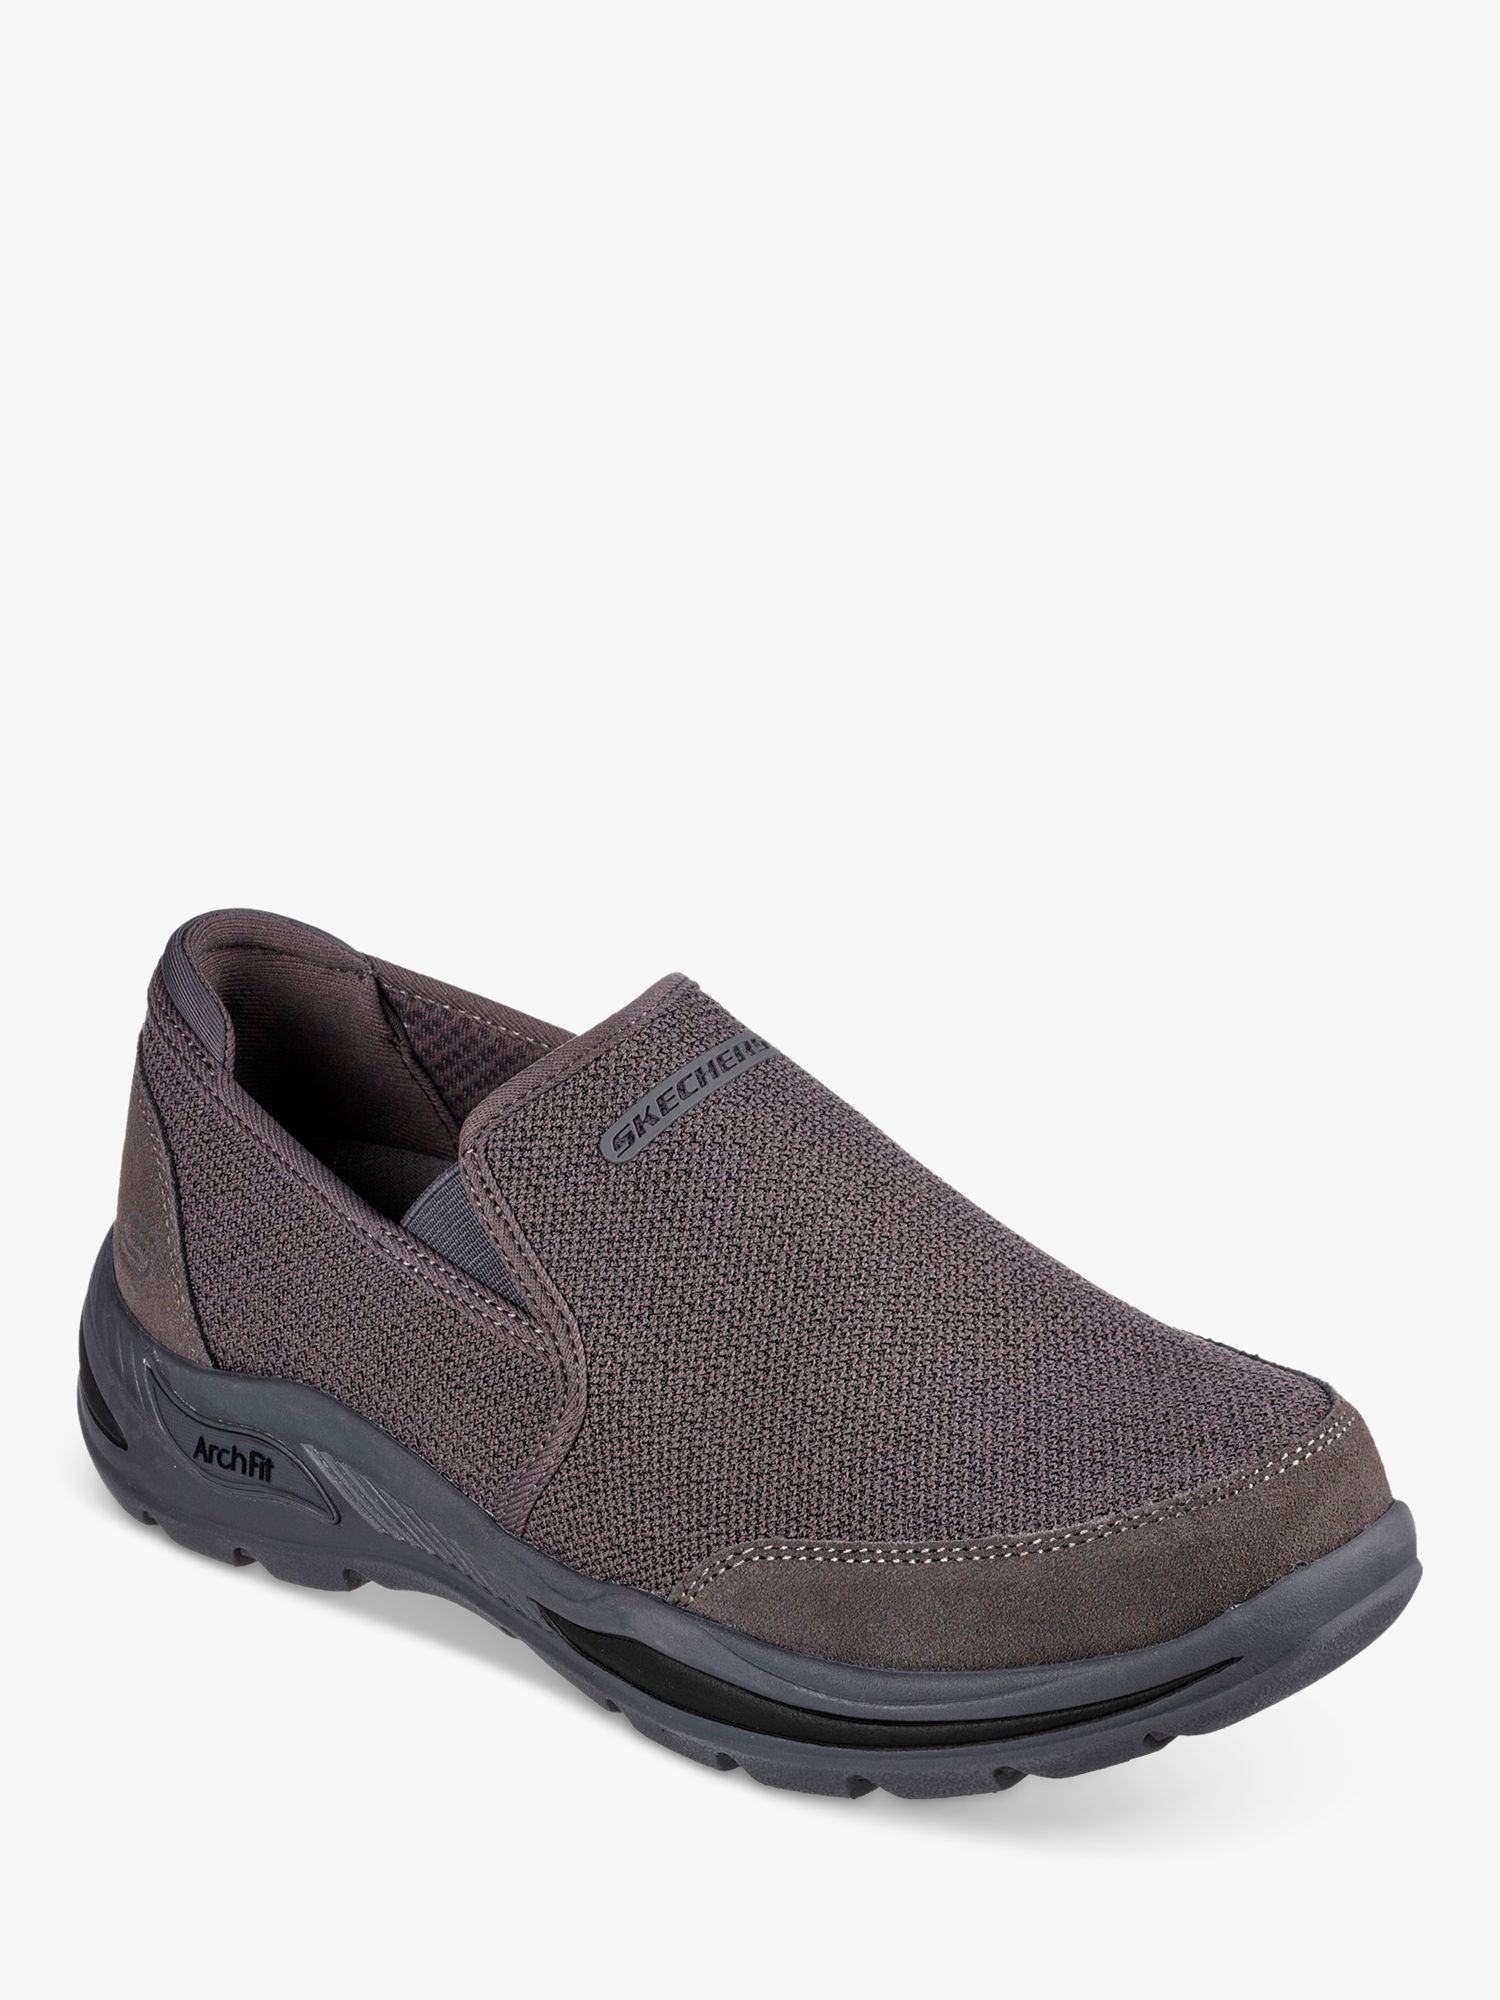 Skechers Arch Fit Motley Ratel Slip On Sports Shoes, Charcoal at John ...